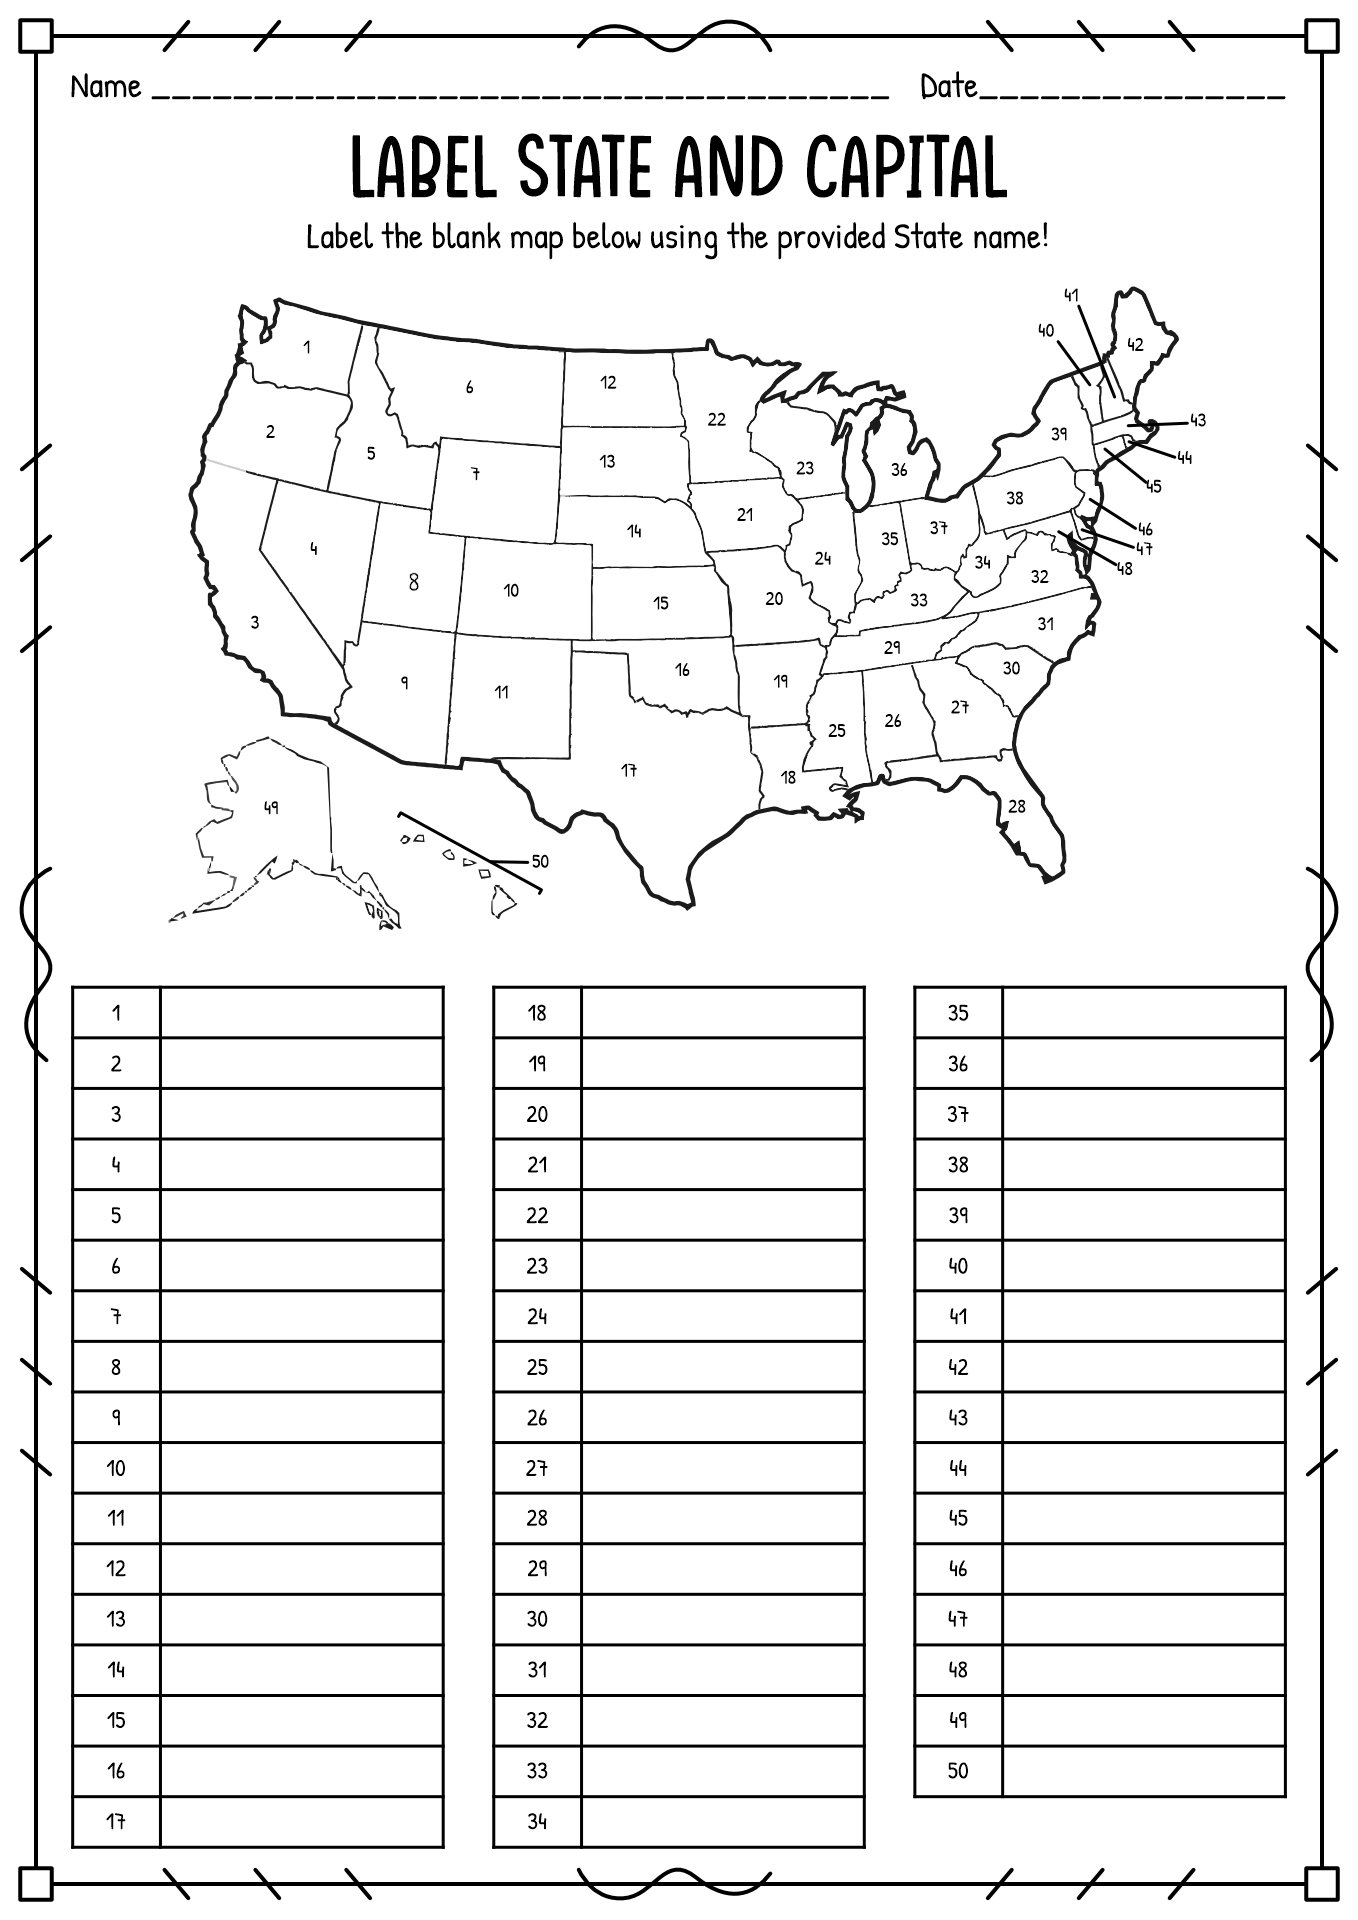 14 Best Images of States And Capitals Worksheets - States ...